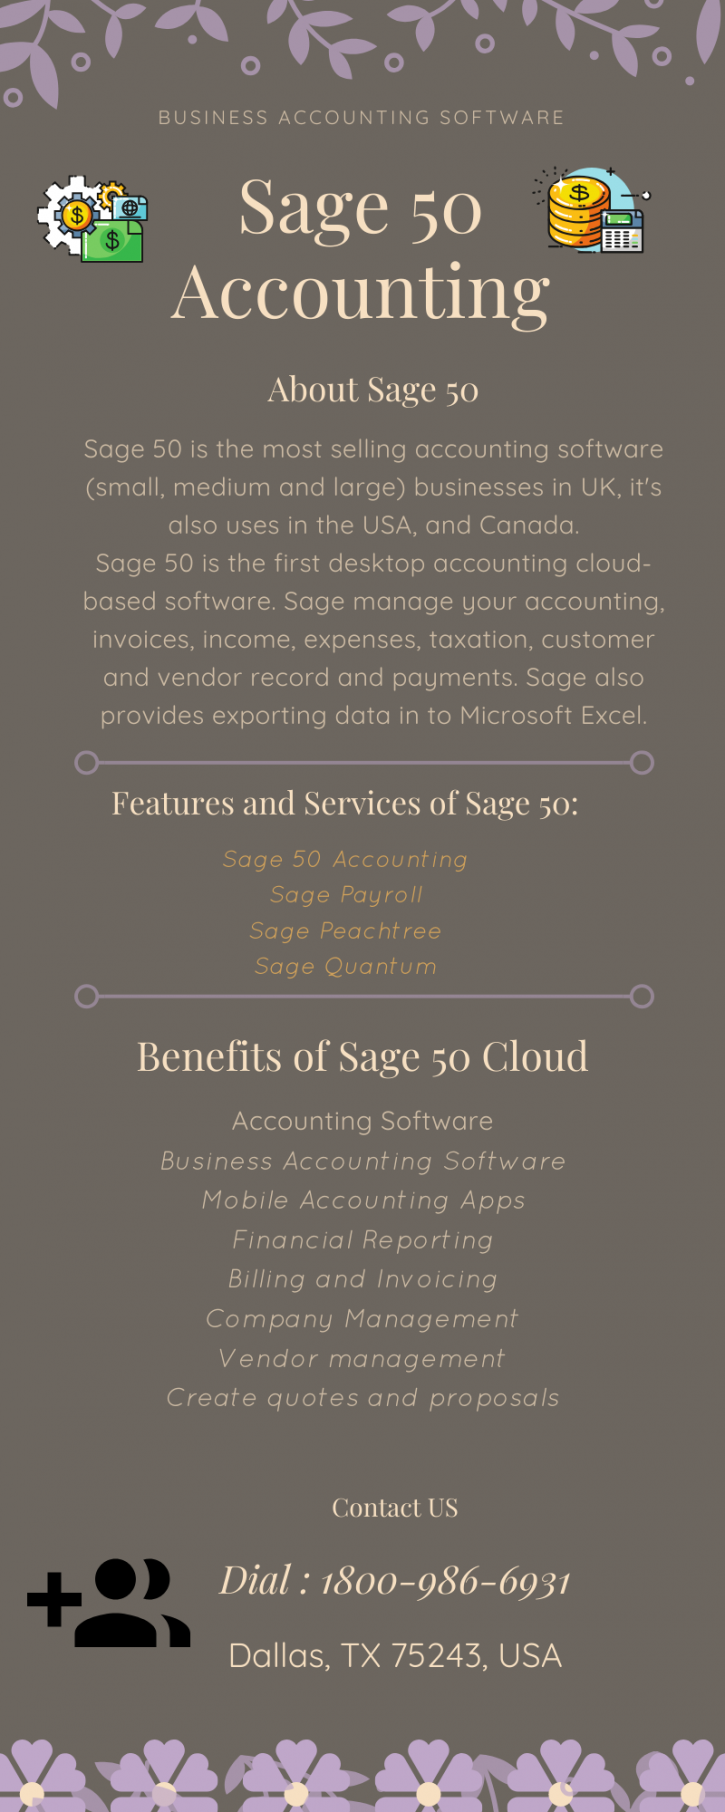 Image for Sage 50 Accounting with ID of: 3868016